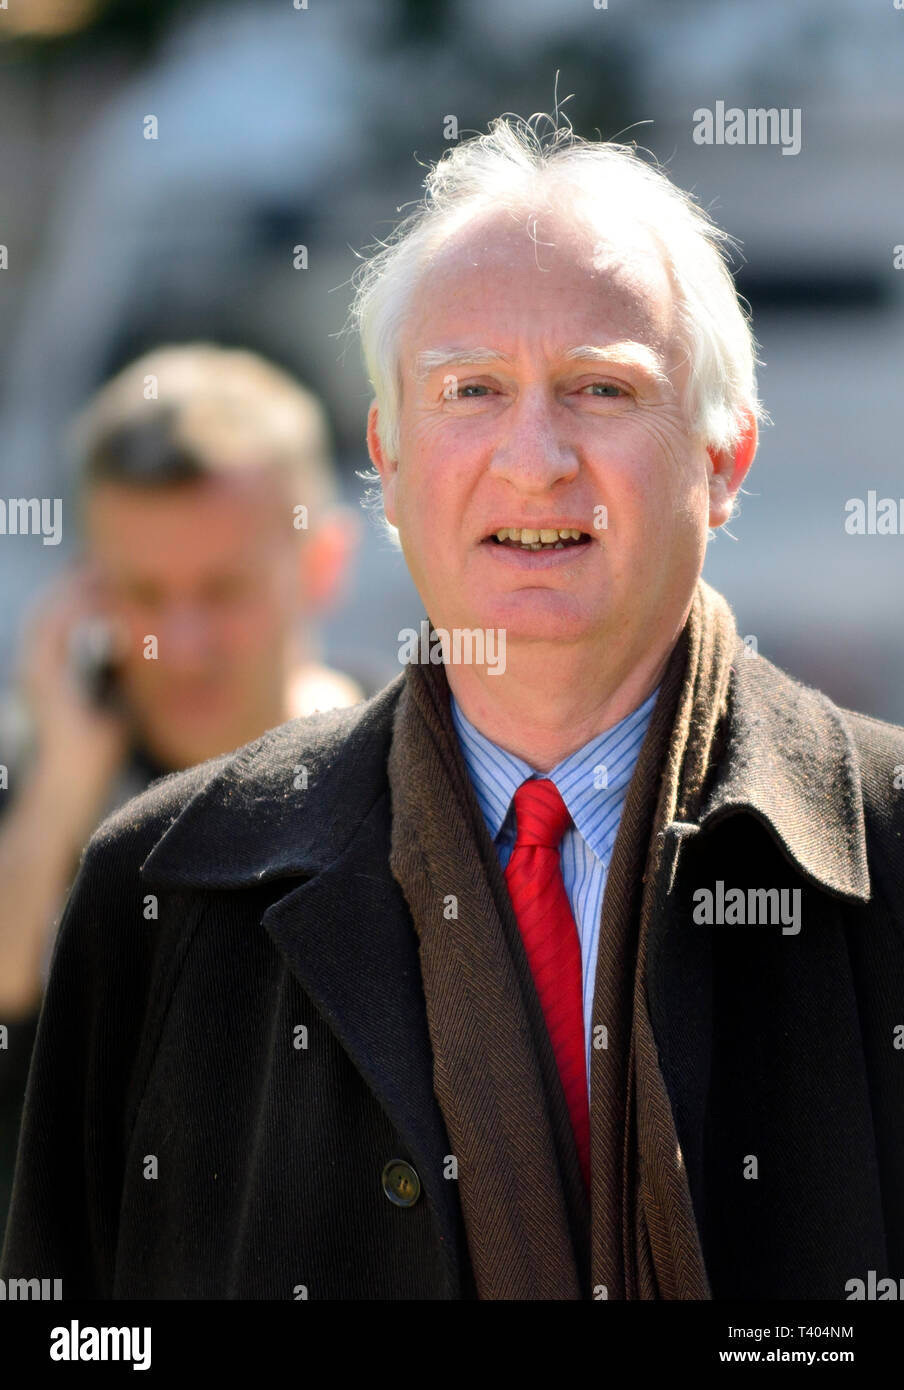 Daniel Zeichner MP (Labour: Cambridge) on College Green, Westminster, 11th April 2019 Stock Photo